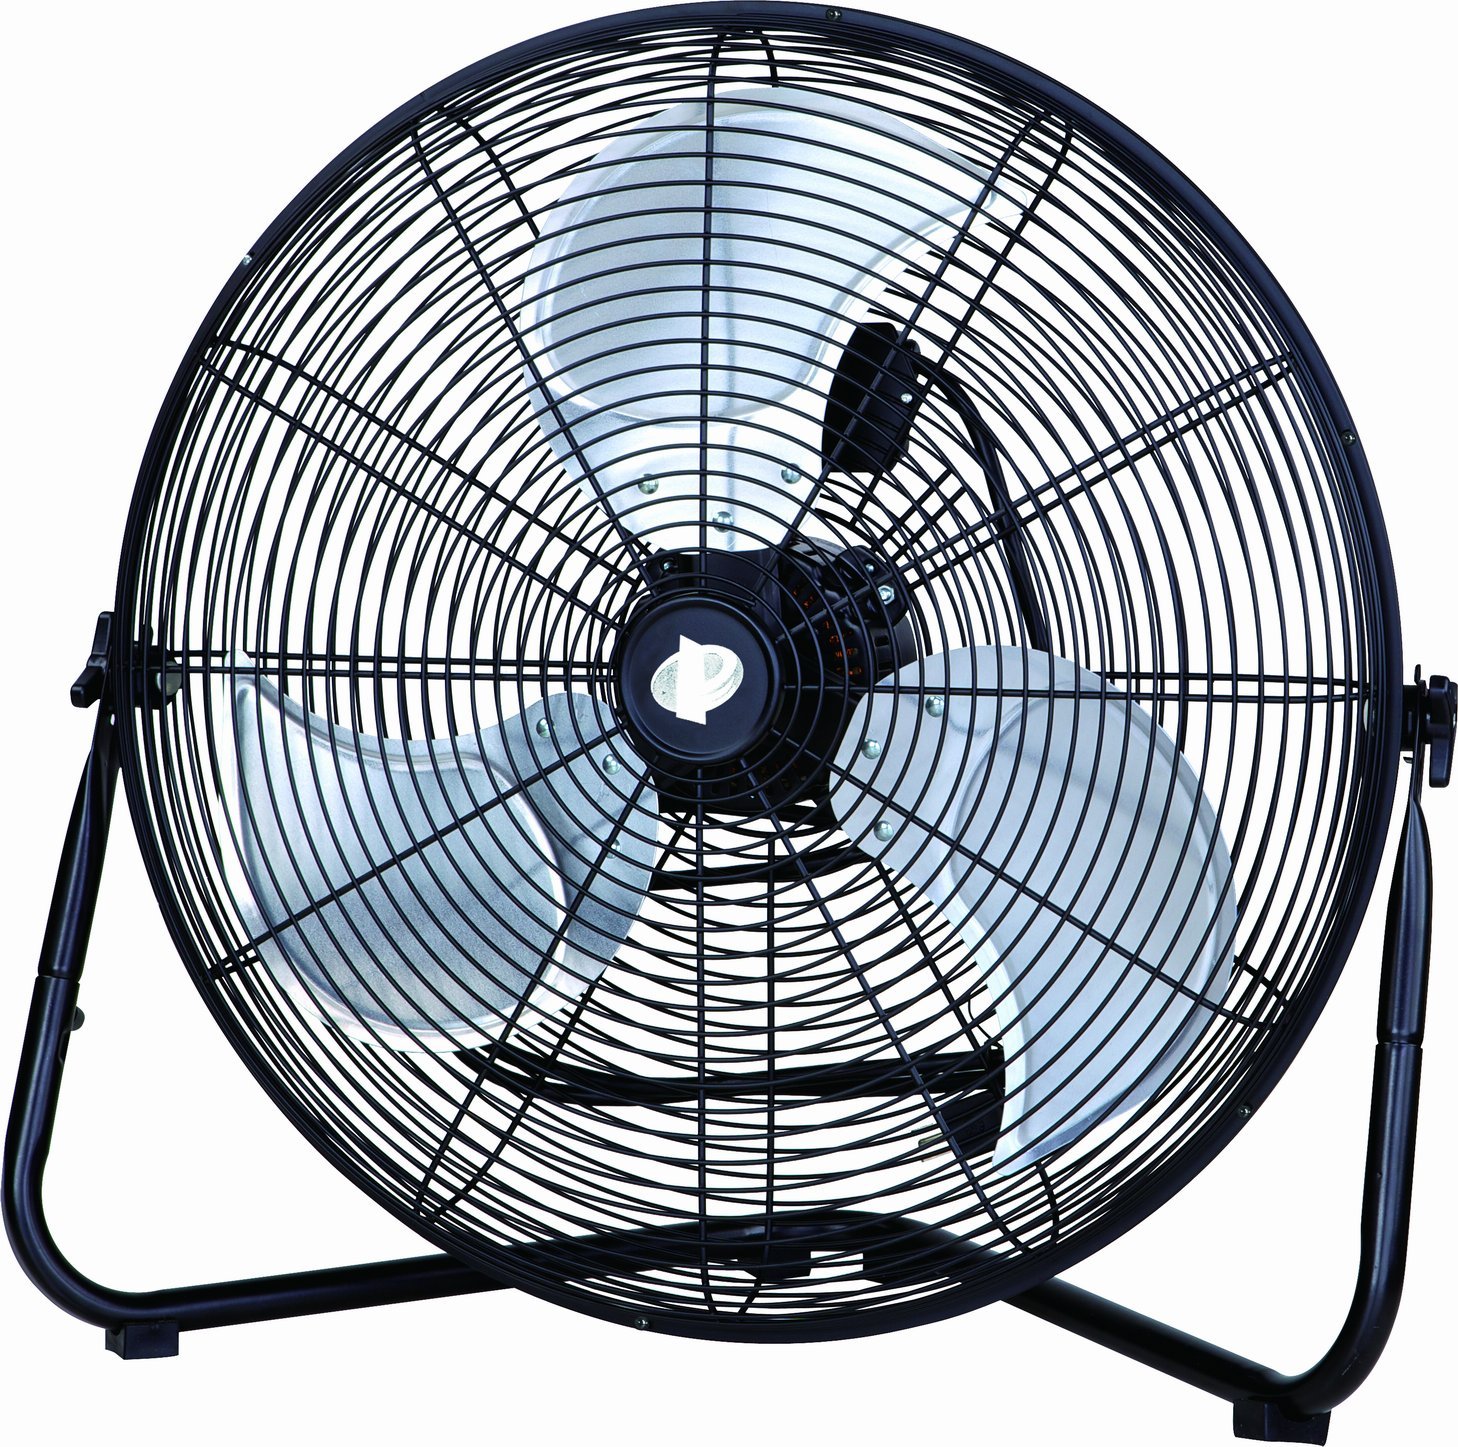 PMX Thermal Protector High Velocity Fan, 20-Inch